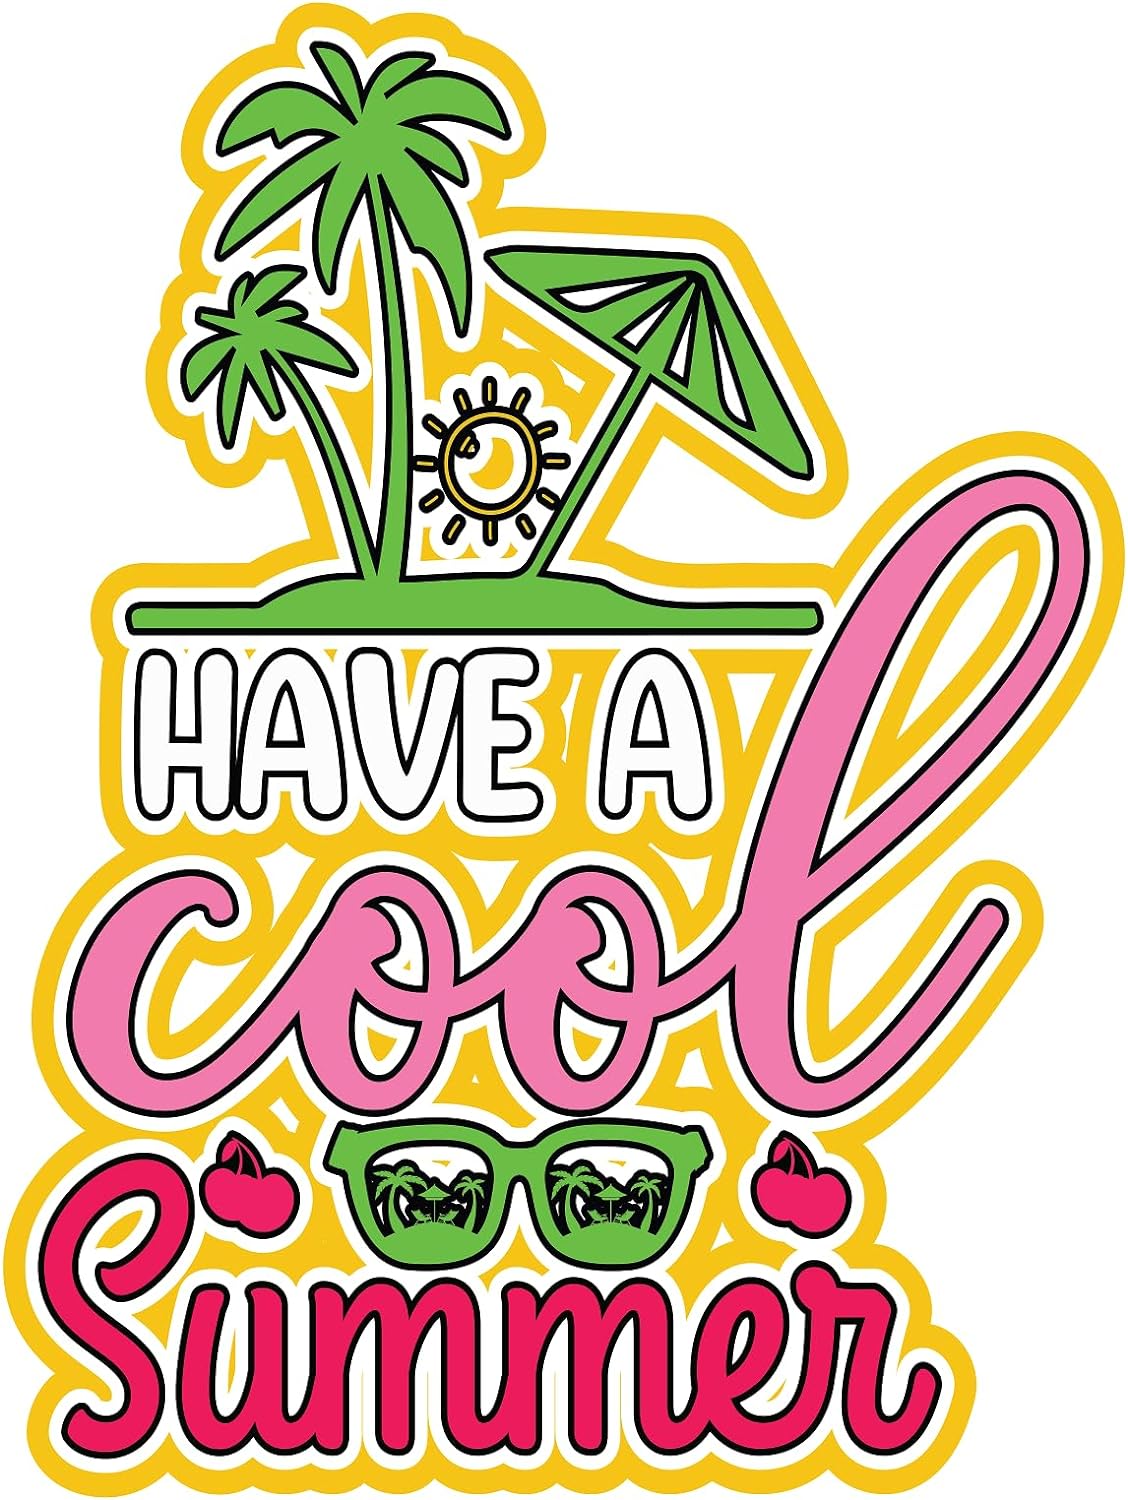 Inspirational Quote "Have a Cool Summer" Motivational Sticker Vinyl Decal Motivation Stickers- 5" Vinyl Sticker Waterproof